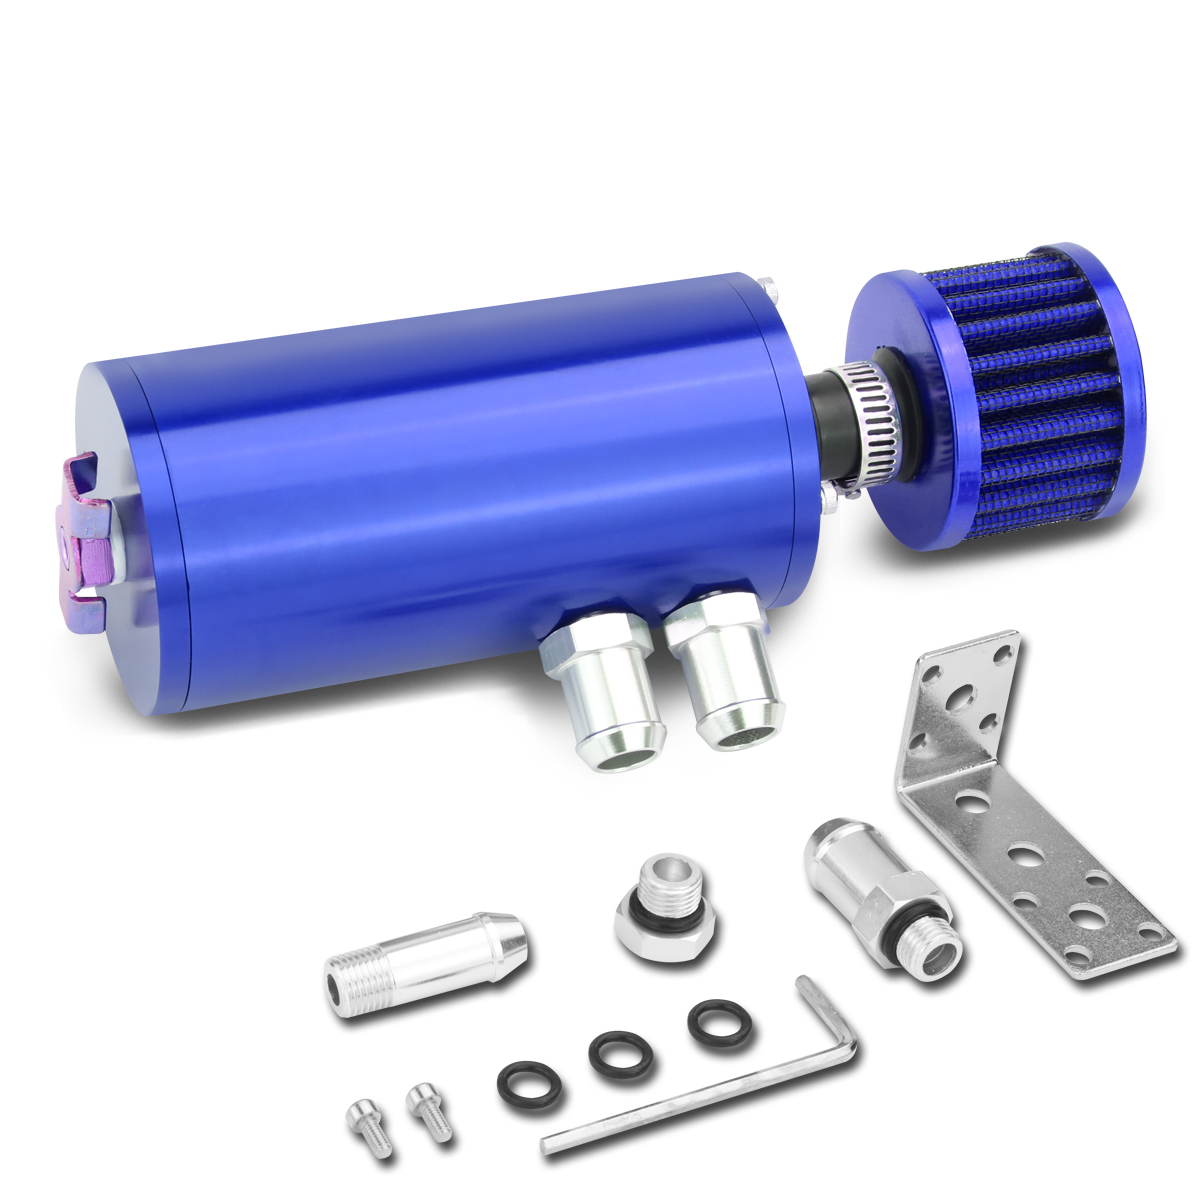 DNA Motoring OCT-ZTL-9044-BL 5.5" x 2.36" Universal Aluminum Anodized Engine Oil Catch Tank/ Can With Filter (Blue)